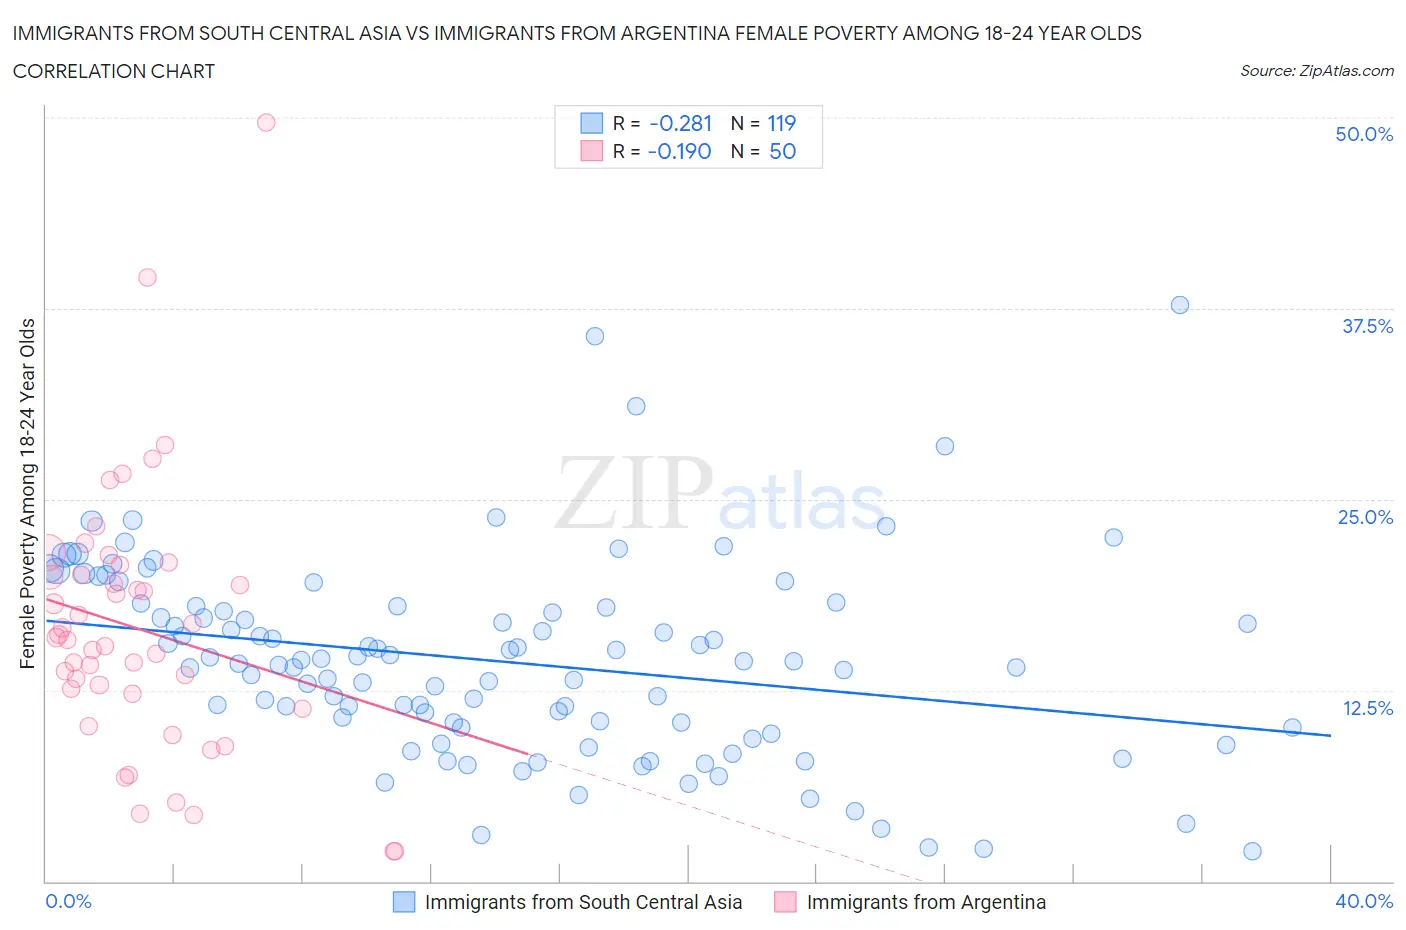 Immigrants from South Central Asia vs Immigrants from Argentina Female Poverty Among 18-24 Year Olds